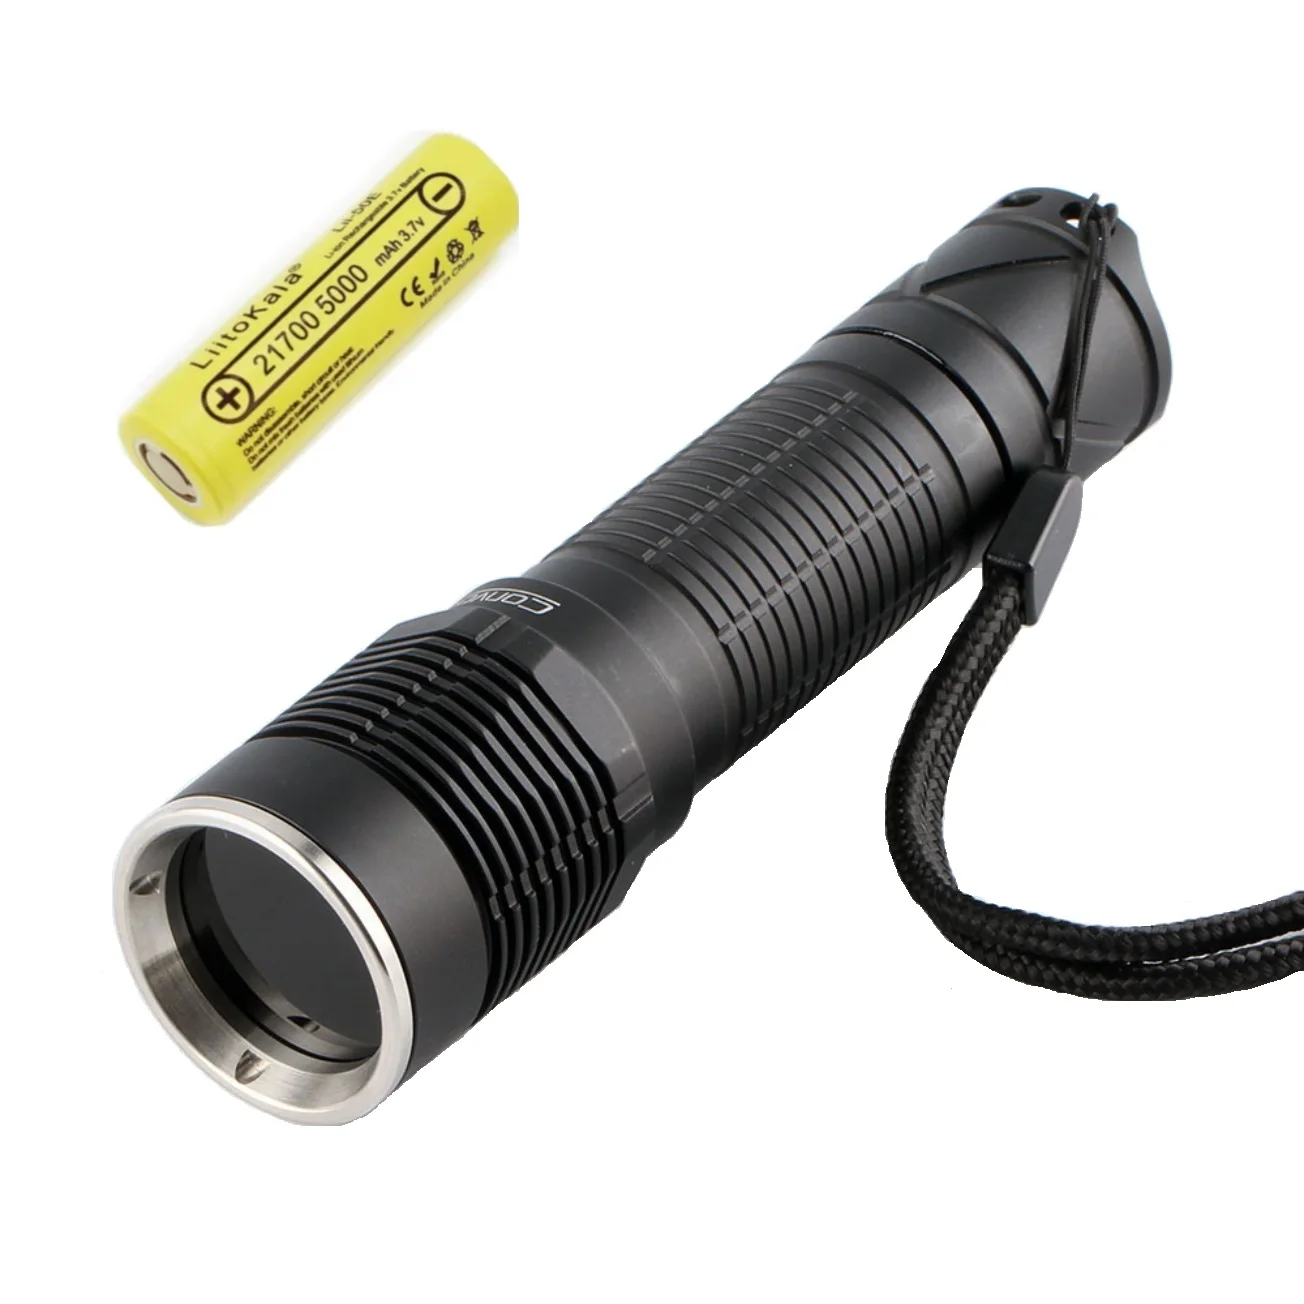 Convoy S12 3*UV 365nm Ultraviolet Torch,Powerful LED Flashlight by 21700 Battery for Fluorescent Agent Detection,Money Detector